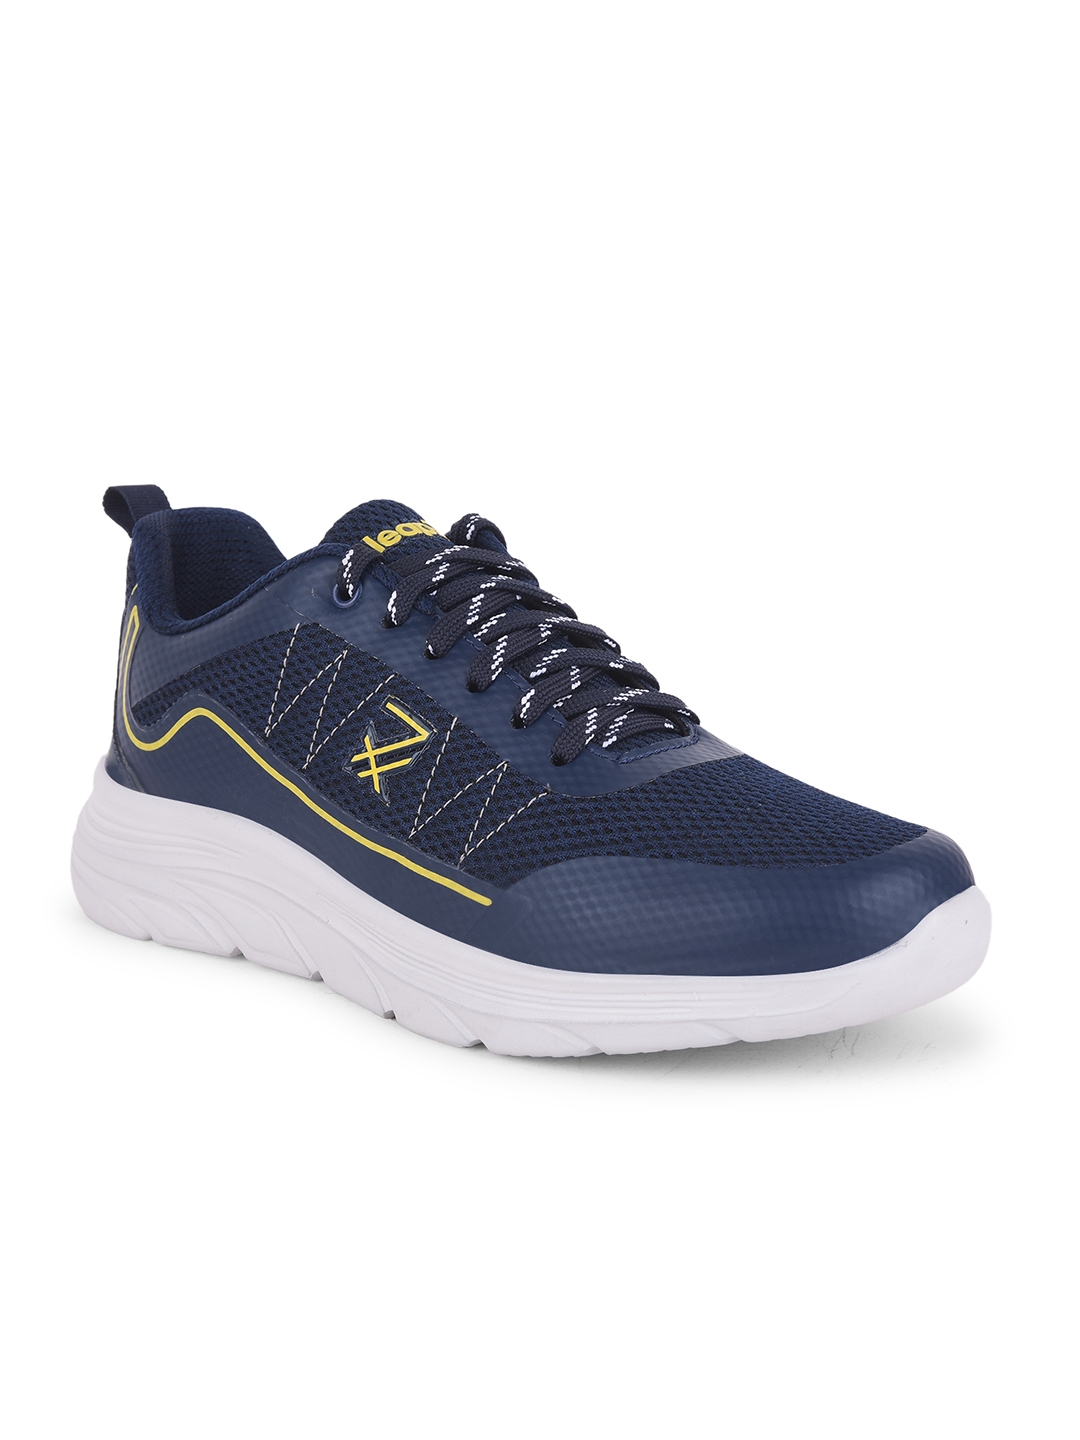 Men's LEAP7X Navy Blue Solid Running Shoes